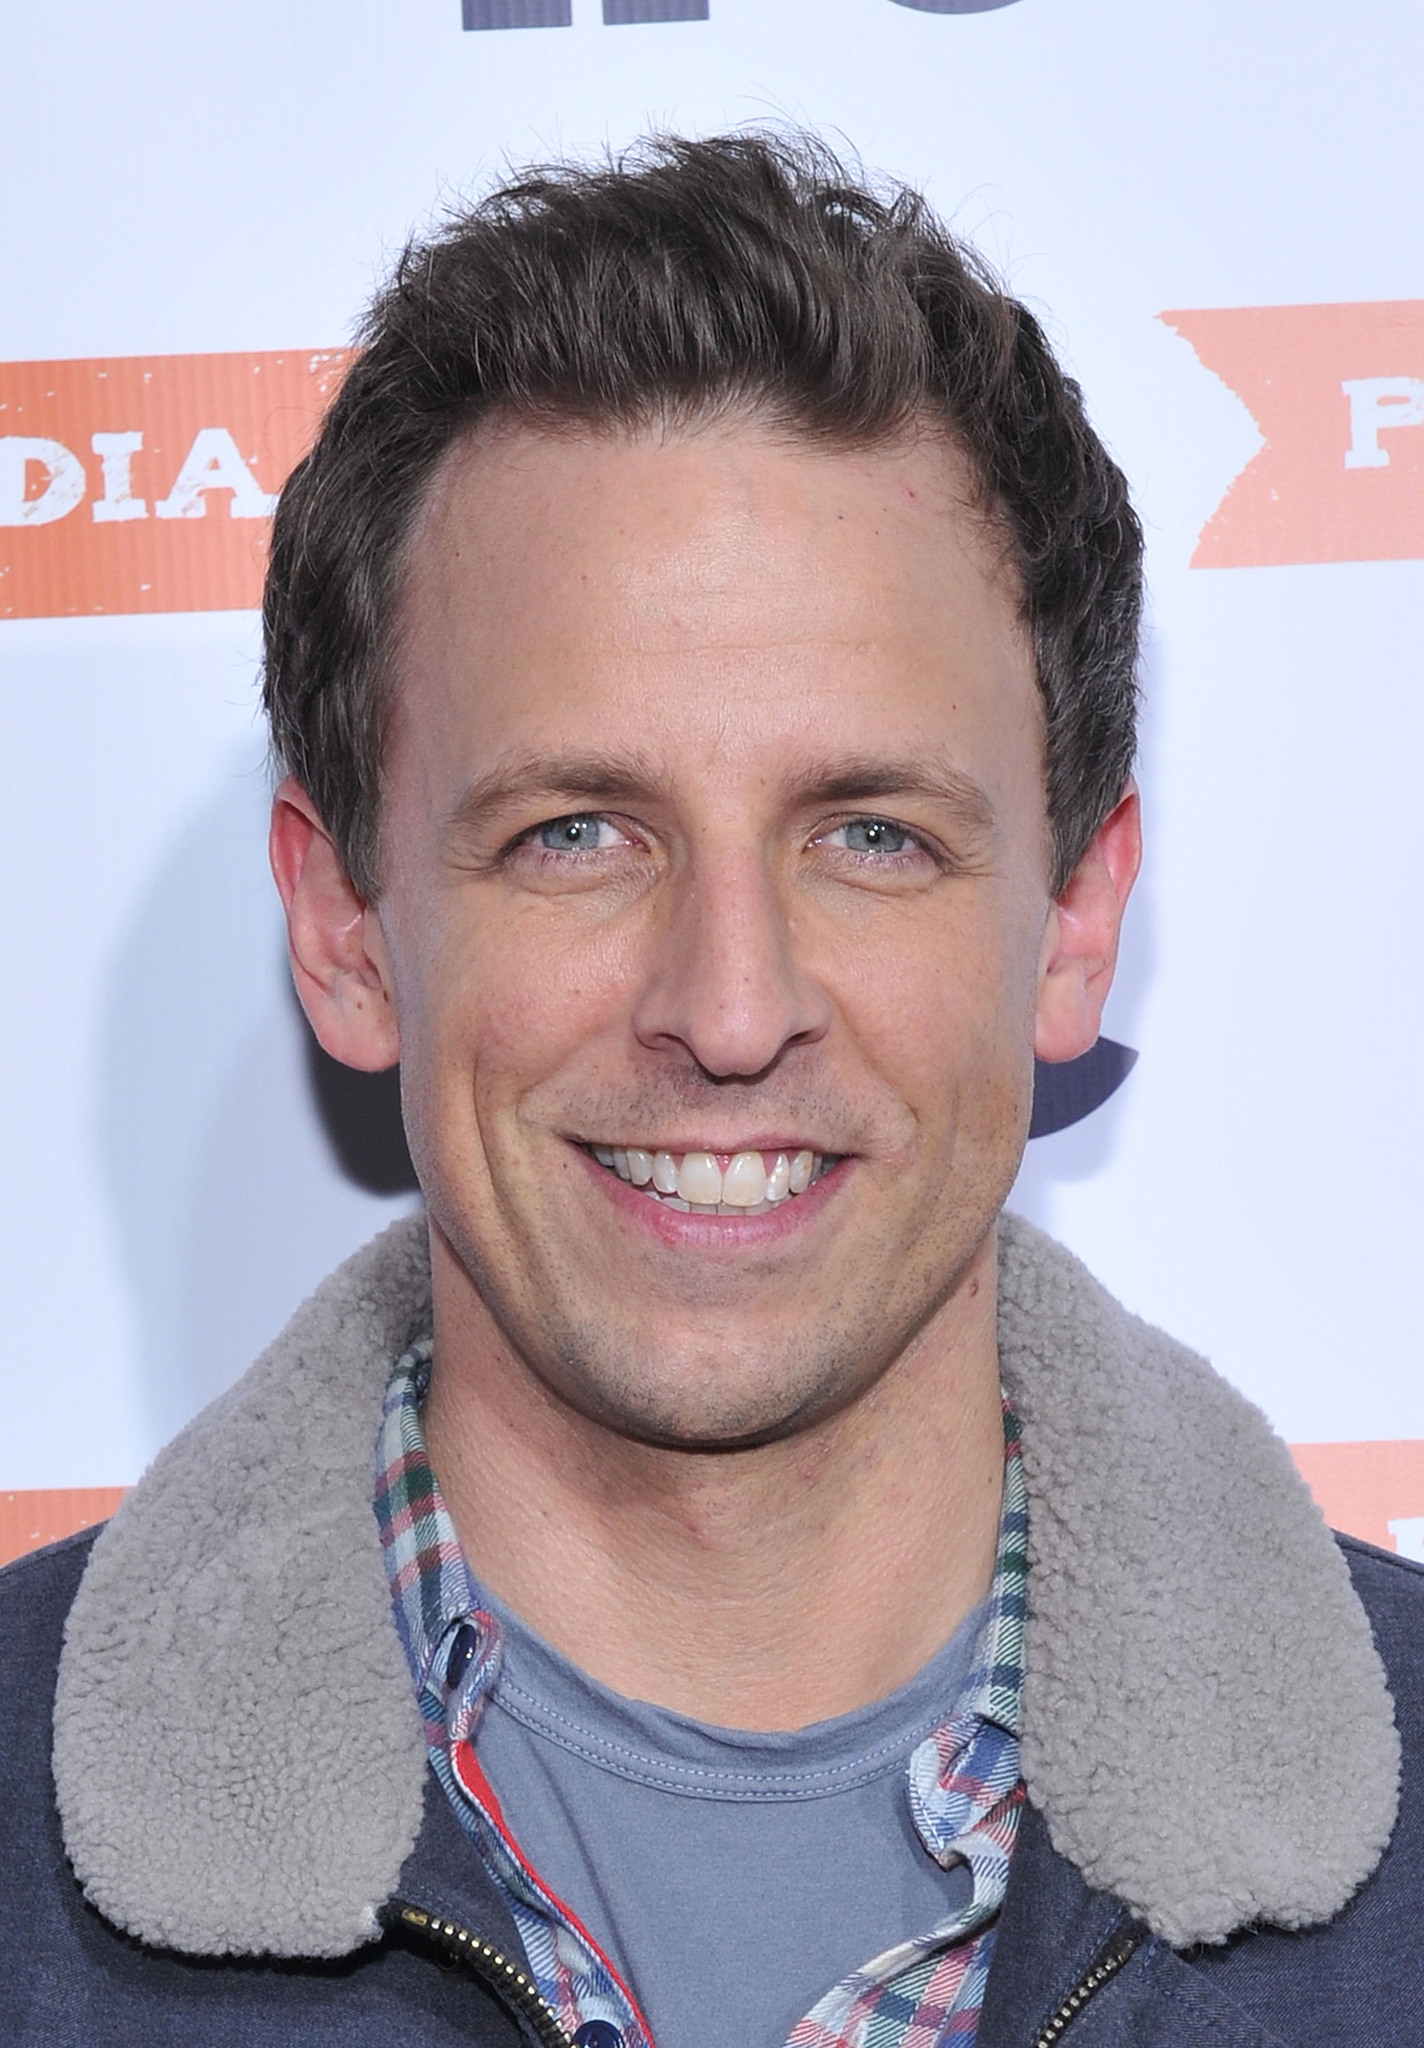 Seth Meyers at an event for Portlandia (2011)